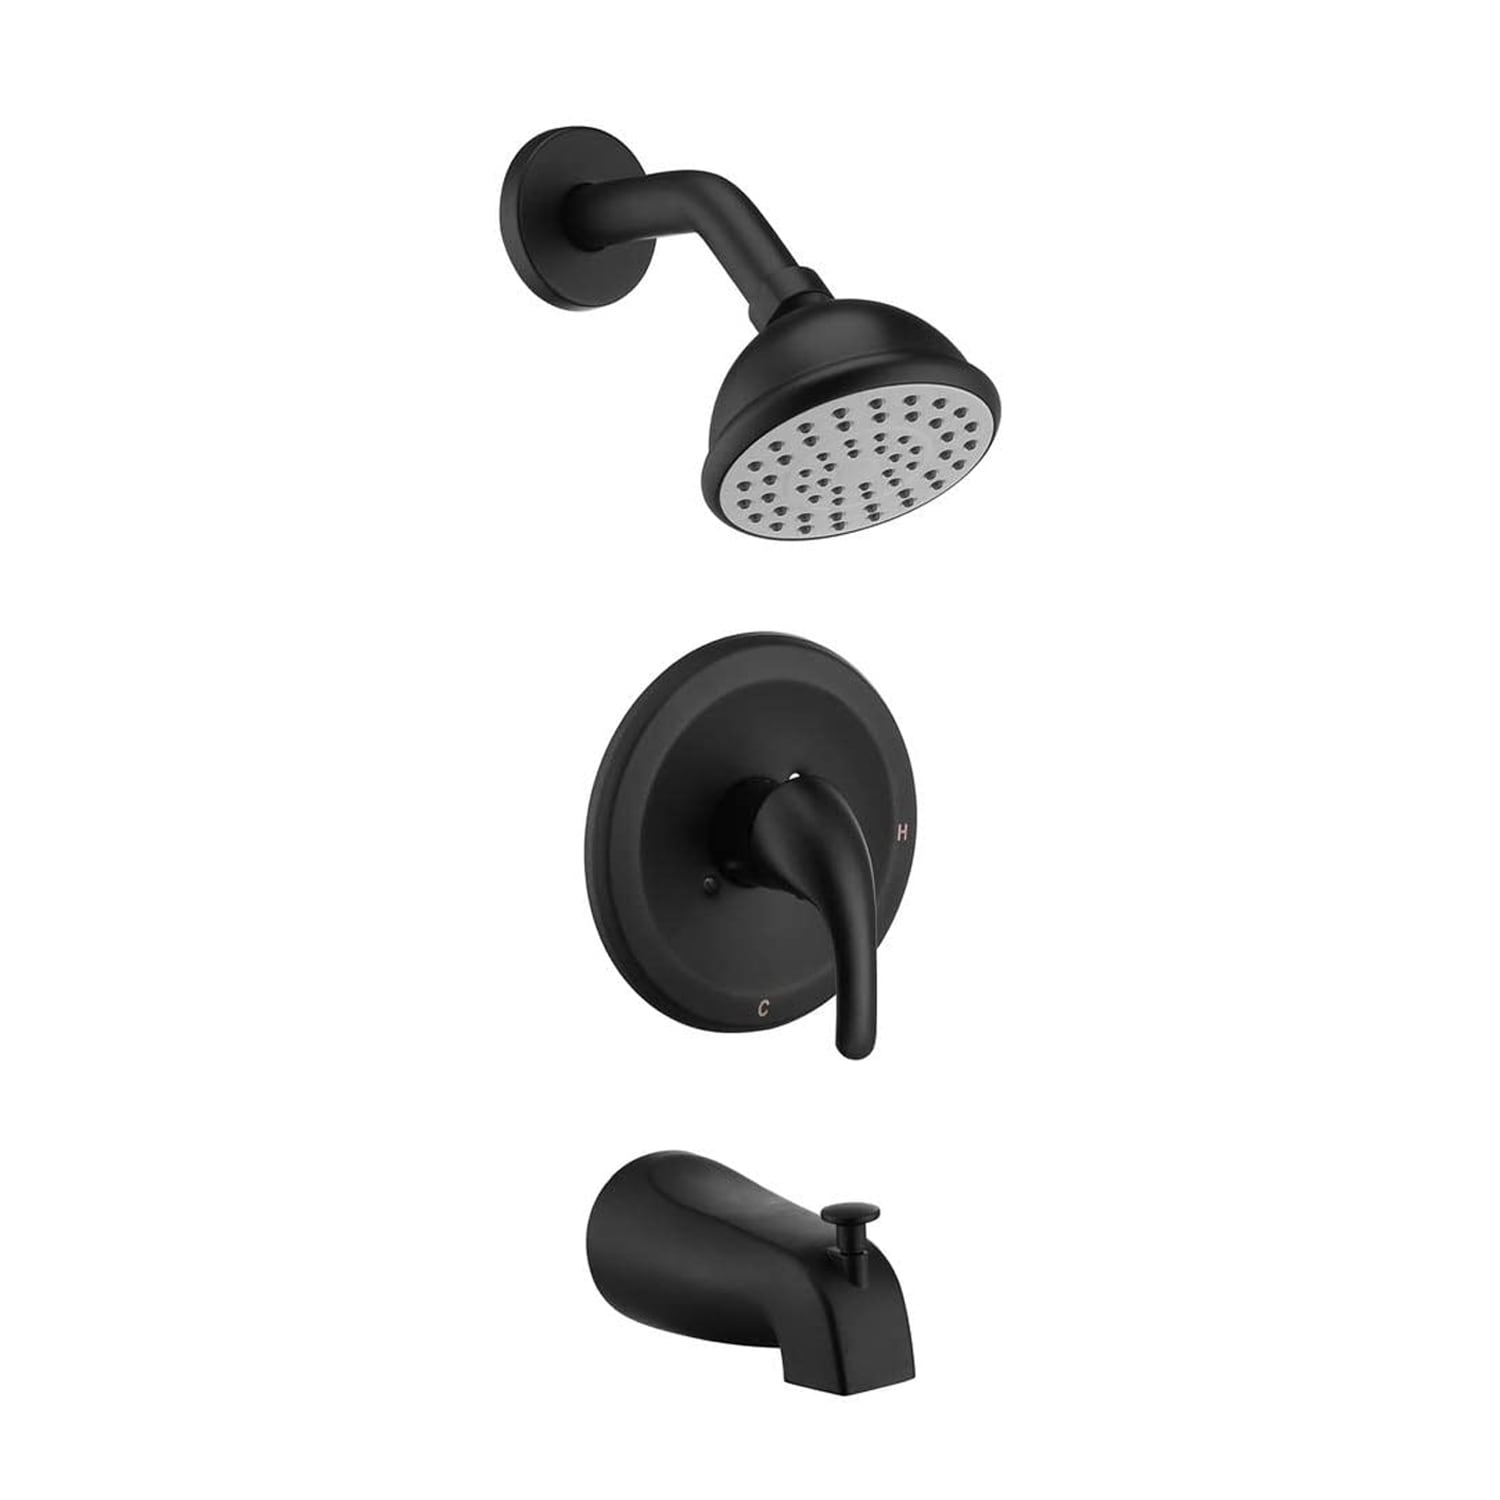 https://ak1.ostkcdn.com/images/products/is/images/direct/f18b3f62499ca9902ab6eaa933db1dd437488b51/Proox-2-Shower-Head-System-Tub-Faucet-Shower-Combo-Set.jpg